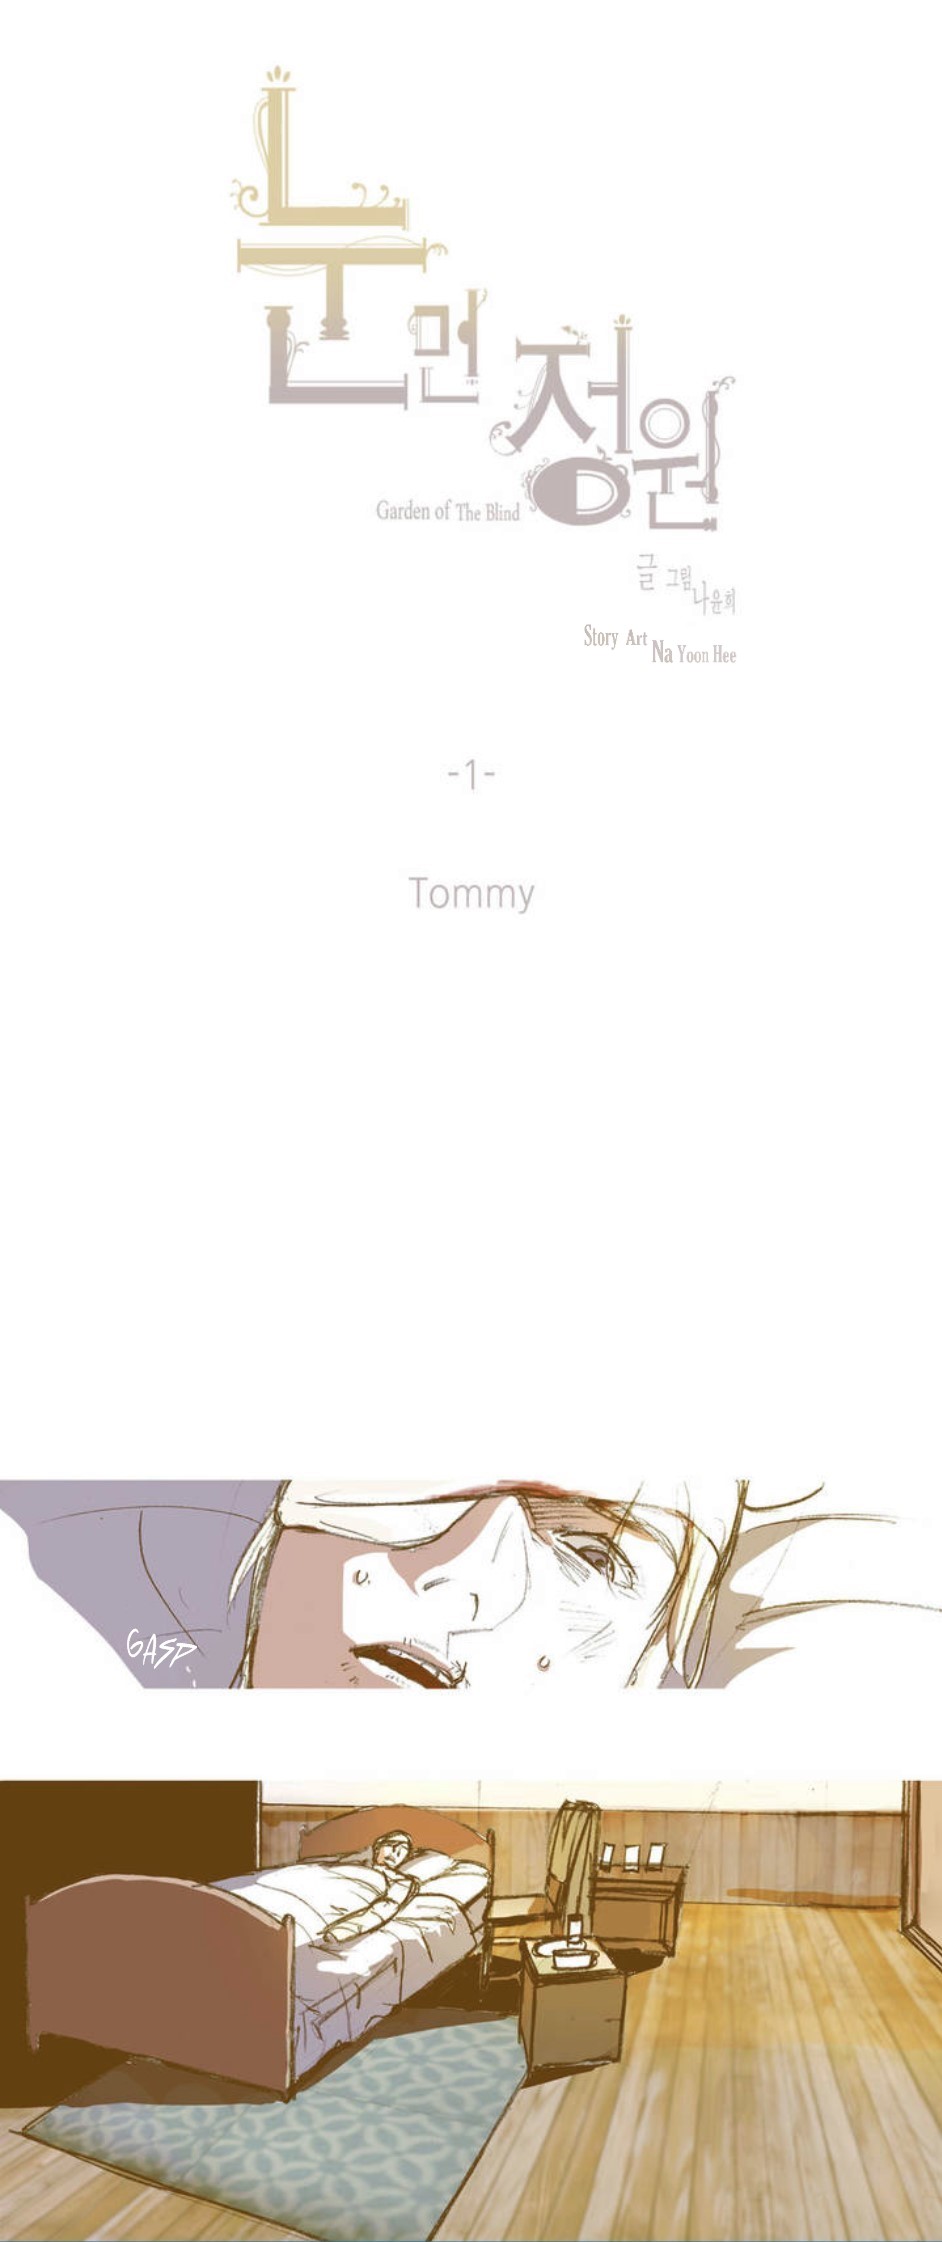 Garden of the Blind Ch. 1 Tommy